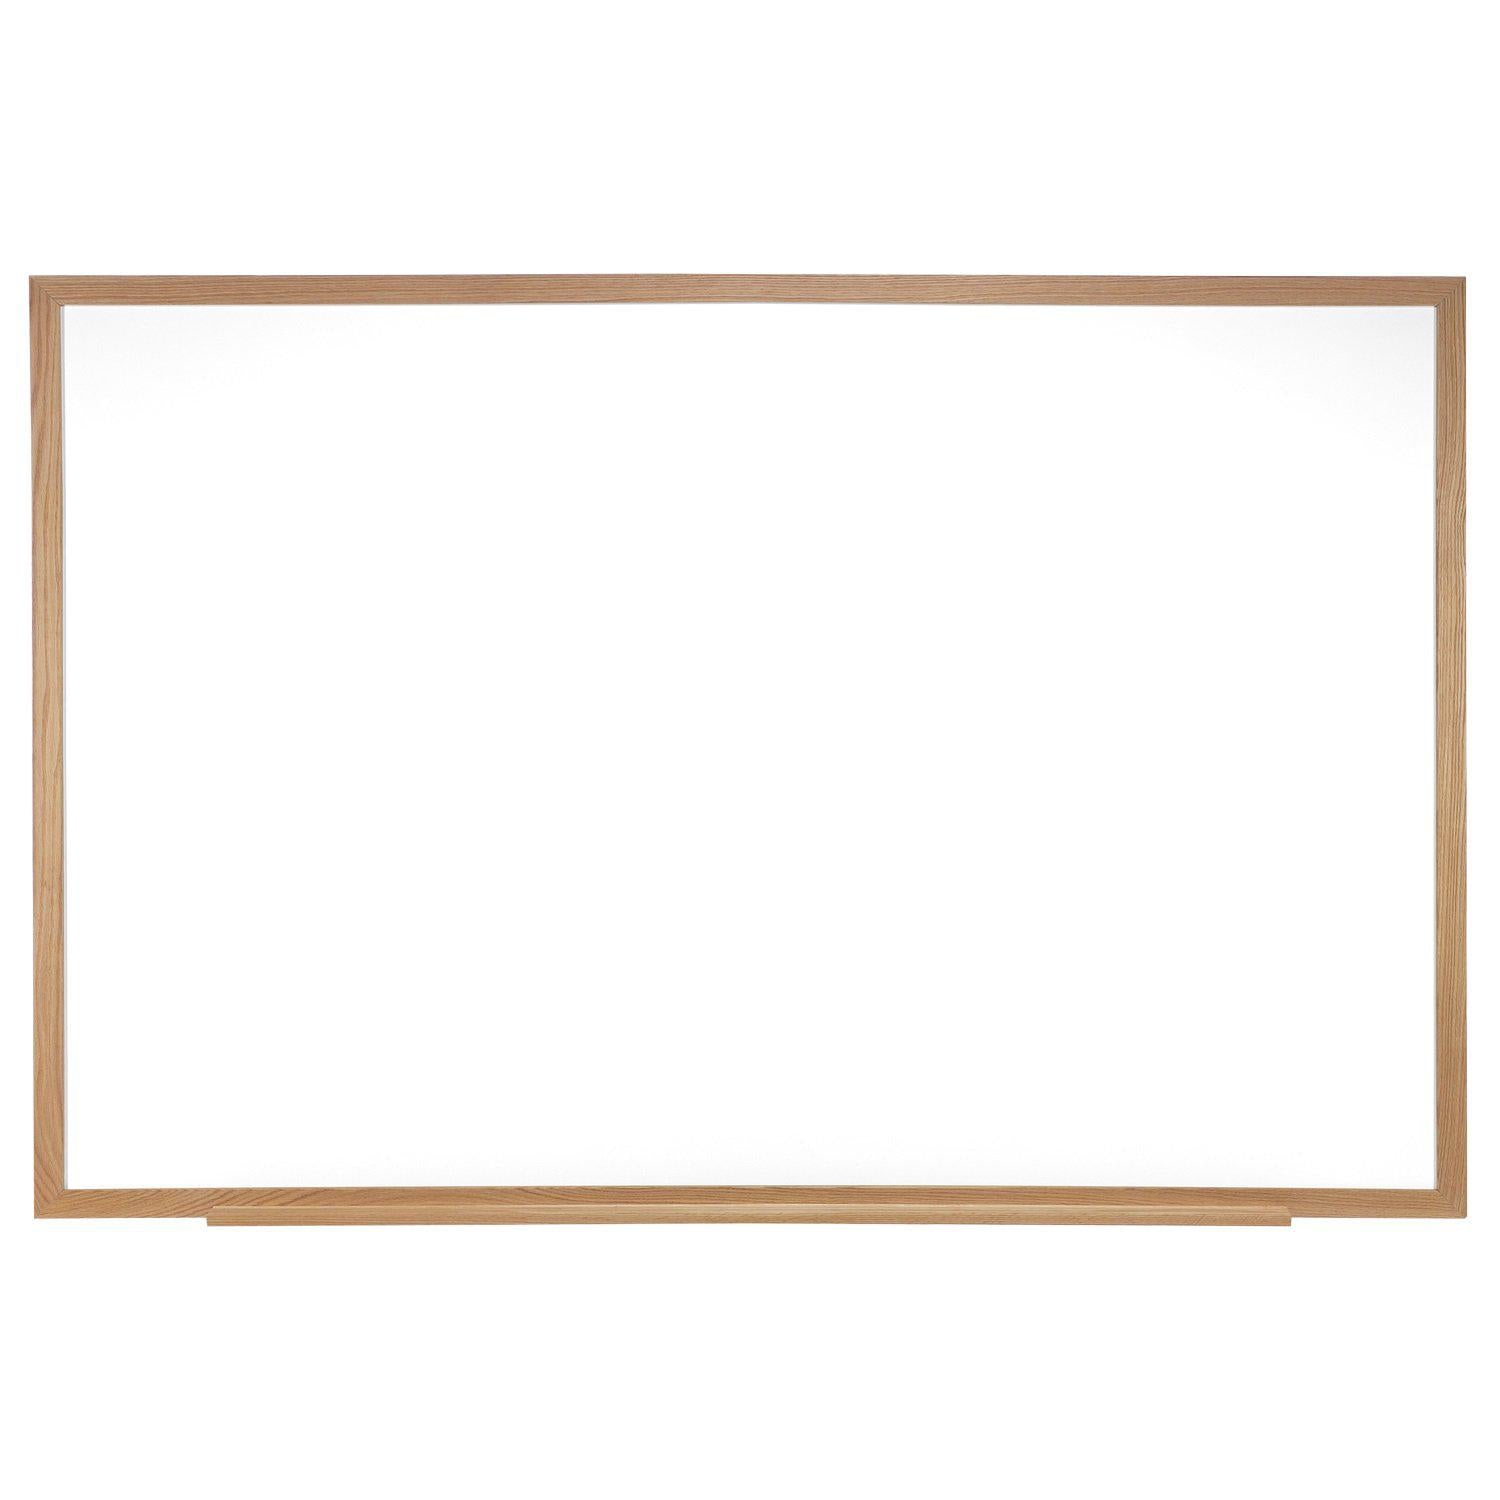 Magnetic Porcelain Whiteboard with Detachable Marker Tray, Wood Frame, 3' H x 4' W, LIFETIME WARRANTY